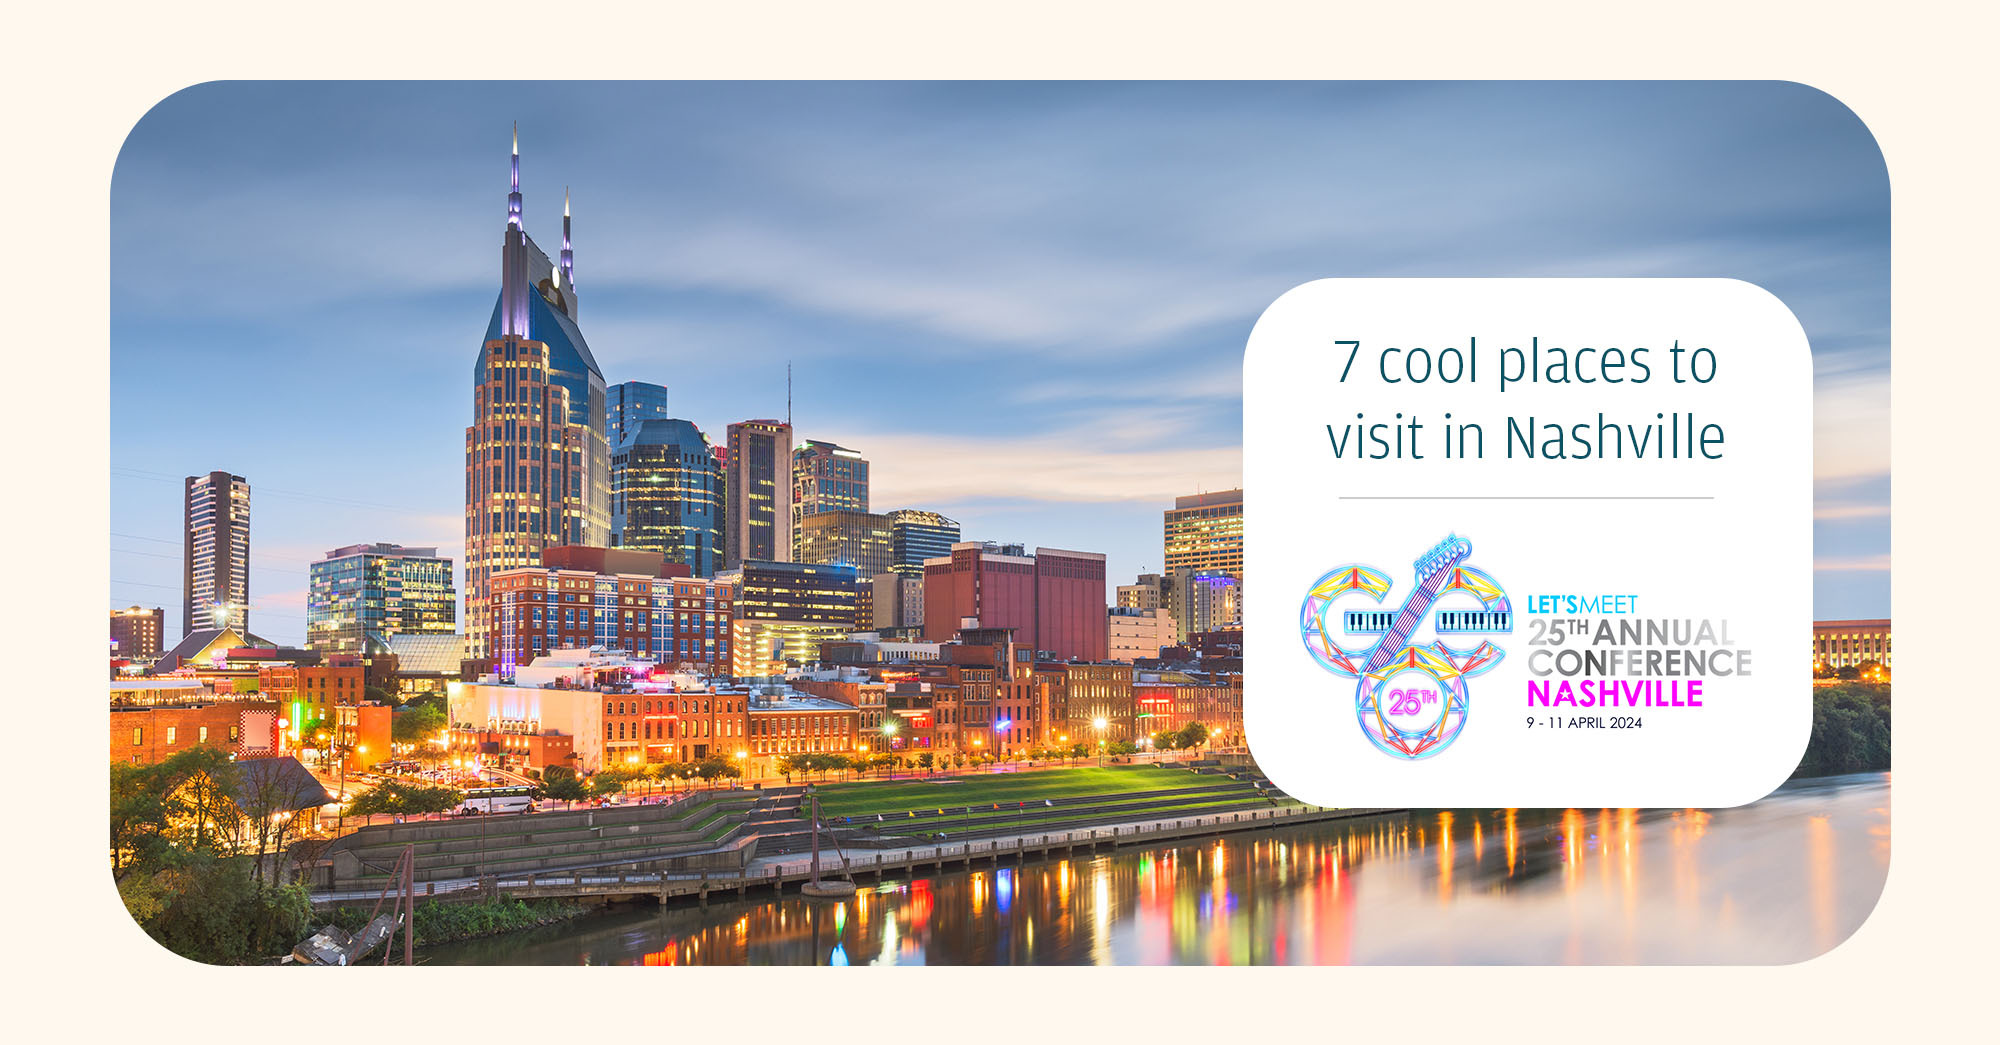 7 spots that capture the essence of Nashville cool to visit while Attending GEO